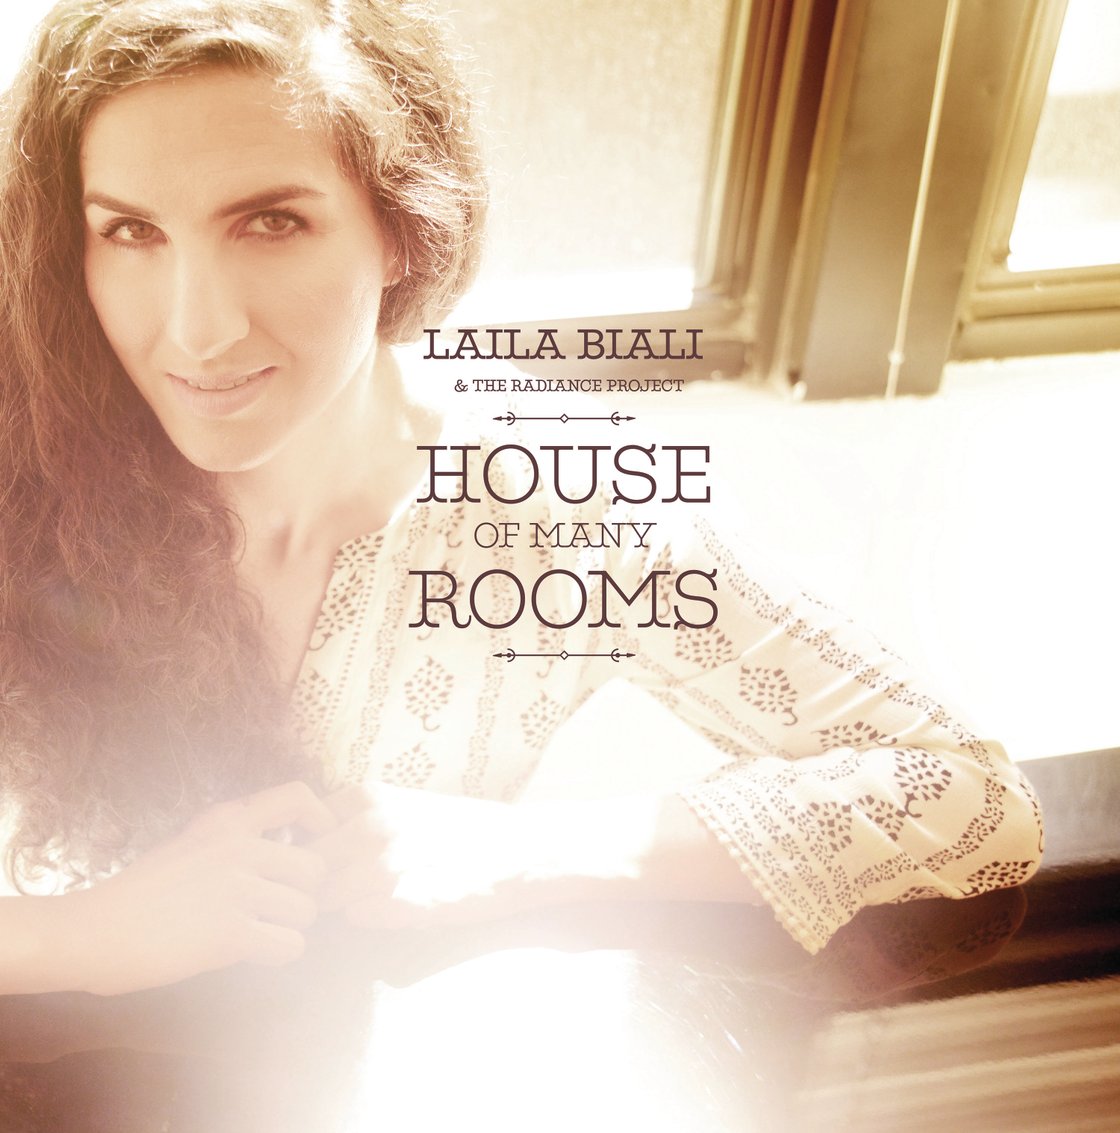 LAILA BIALI - Laila Biali & The Radiance Project : House Of Many Rooms cover 